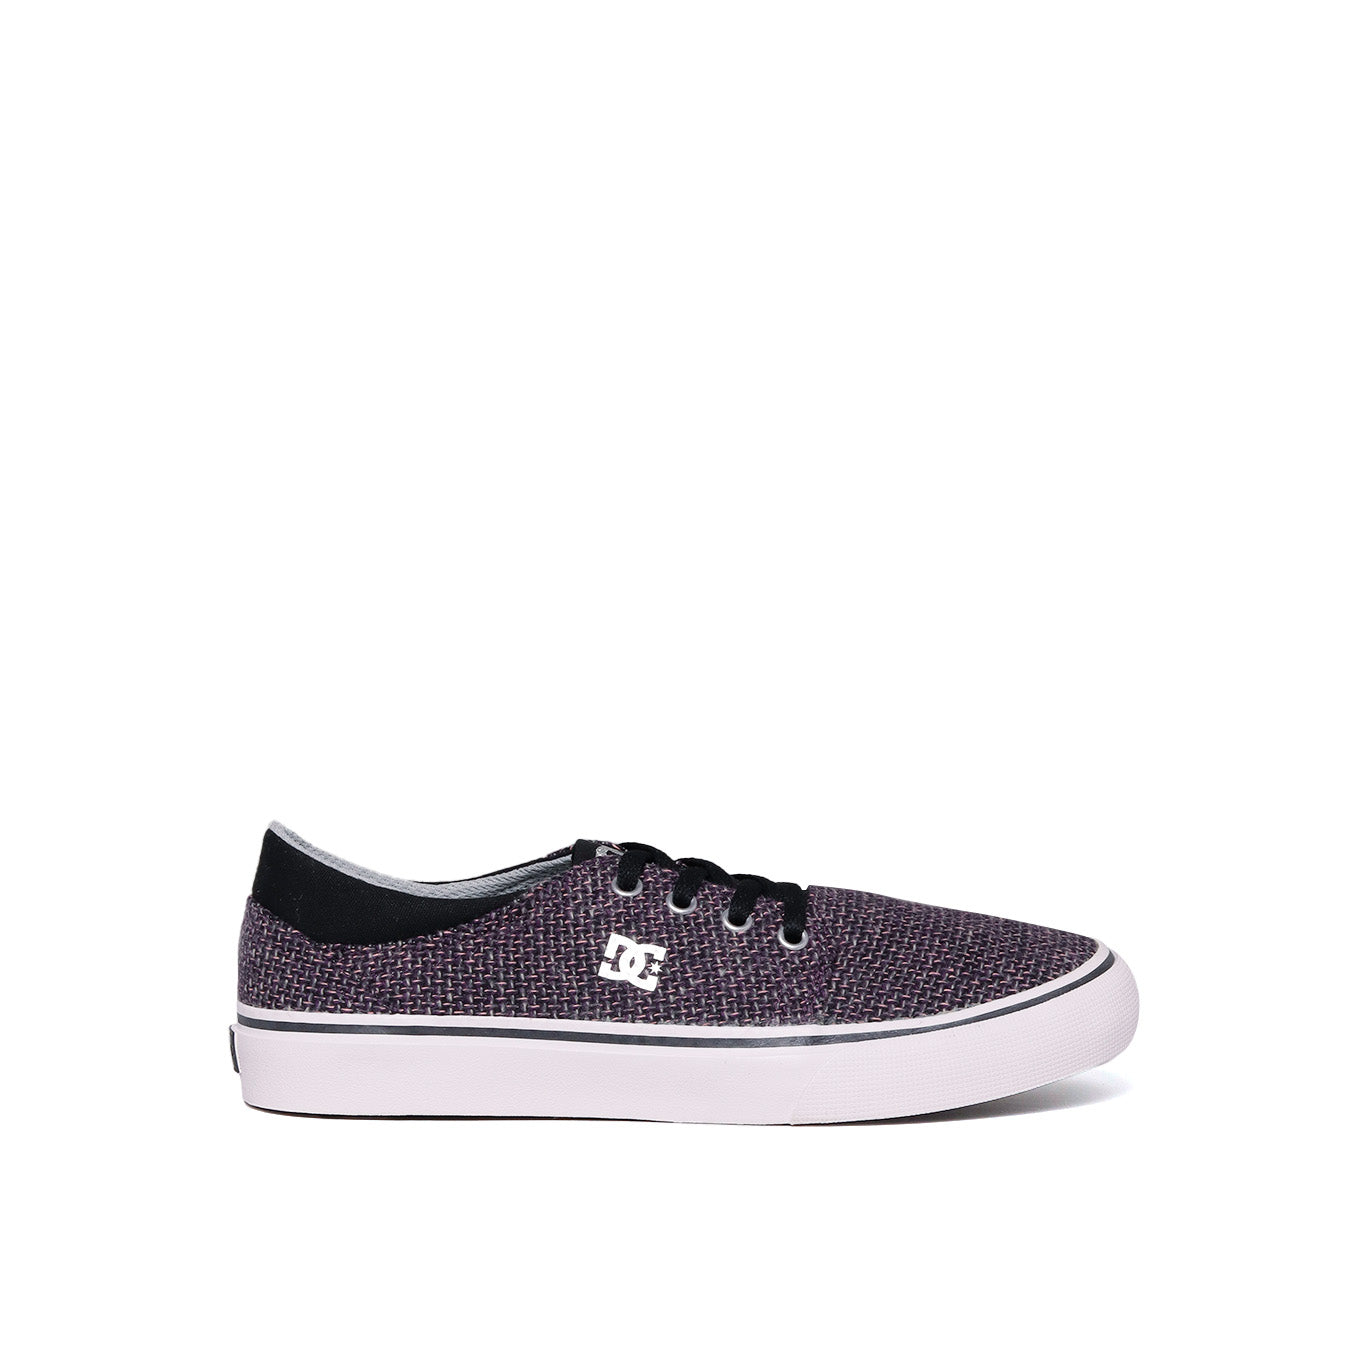 Tenis DC SHOES Trase